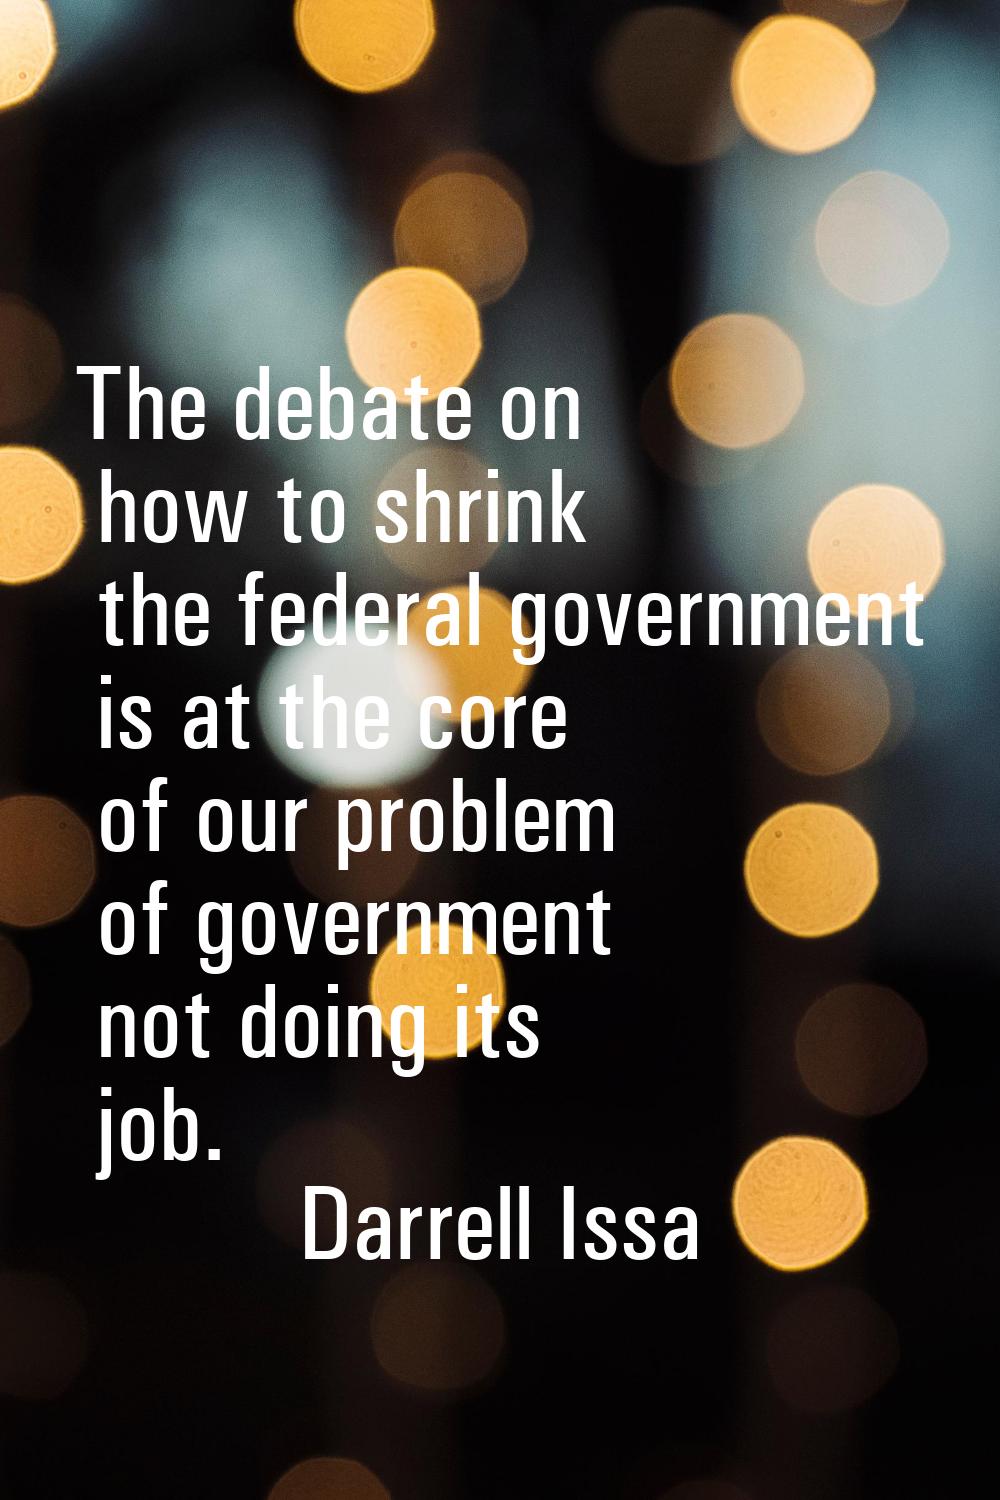 The debate on how to shrink the federal government is at the core of our problem of government not 